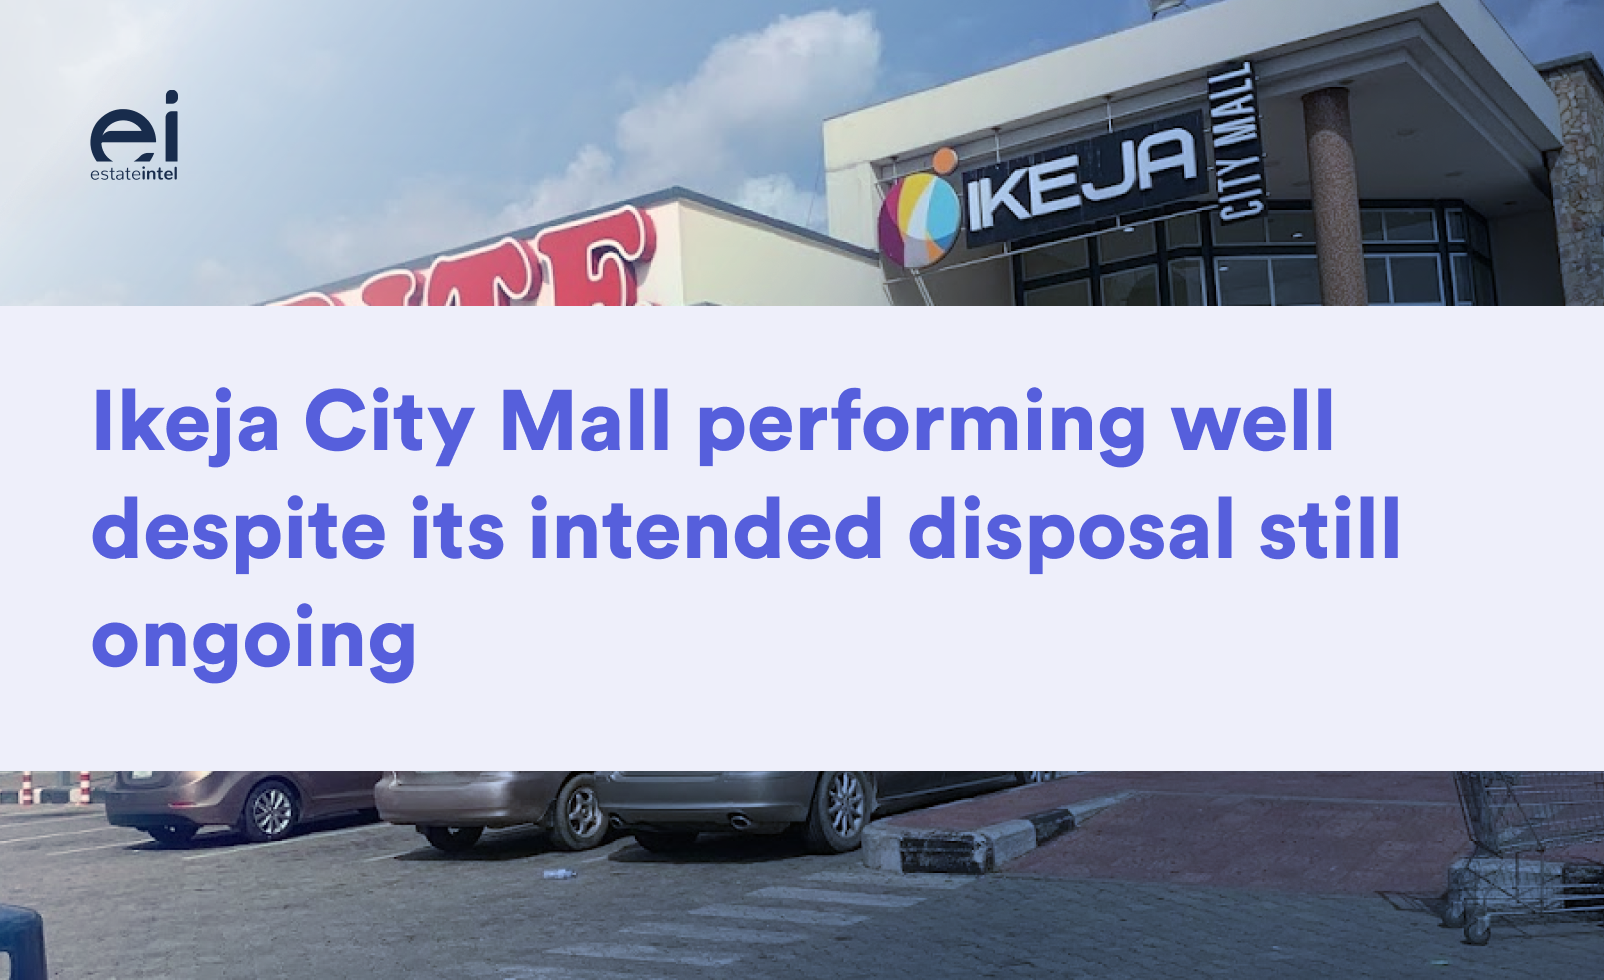 Ikeja City Mall performing well amidst its intended sales transaction